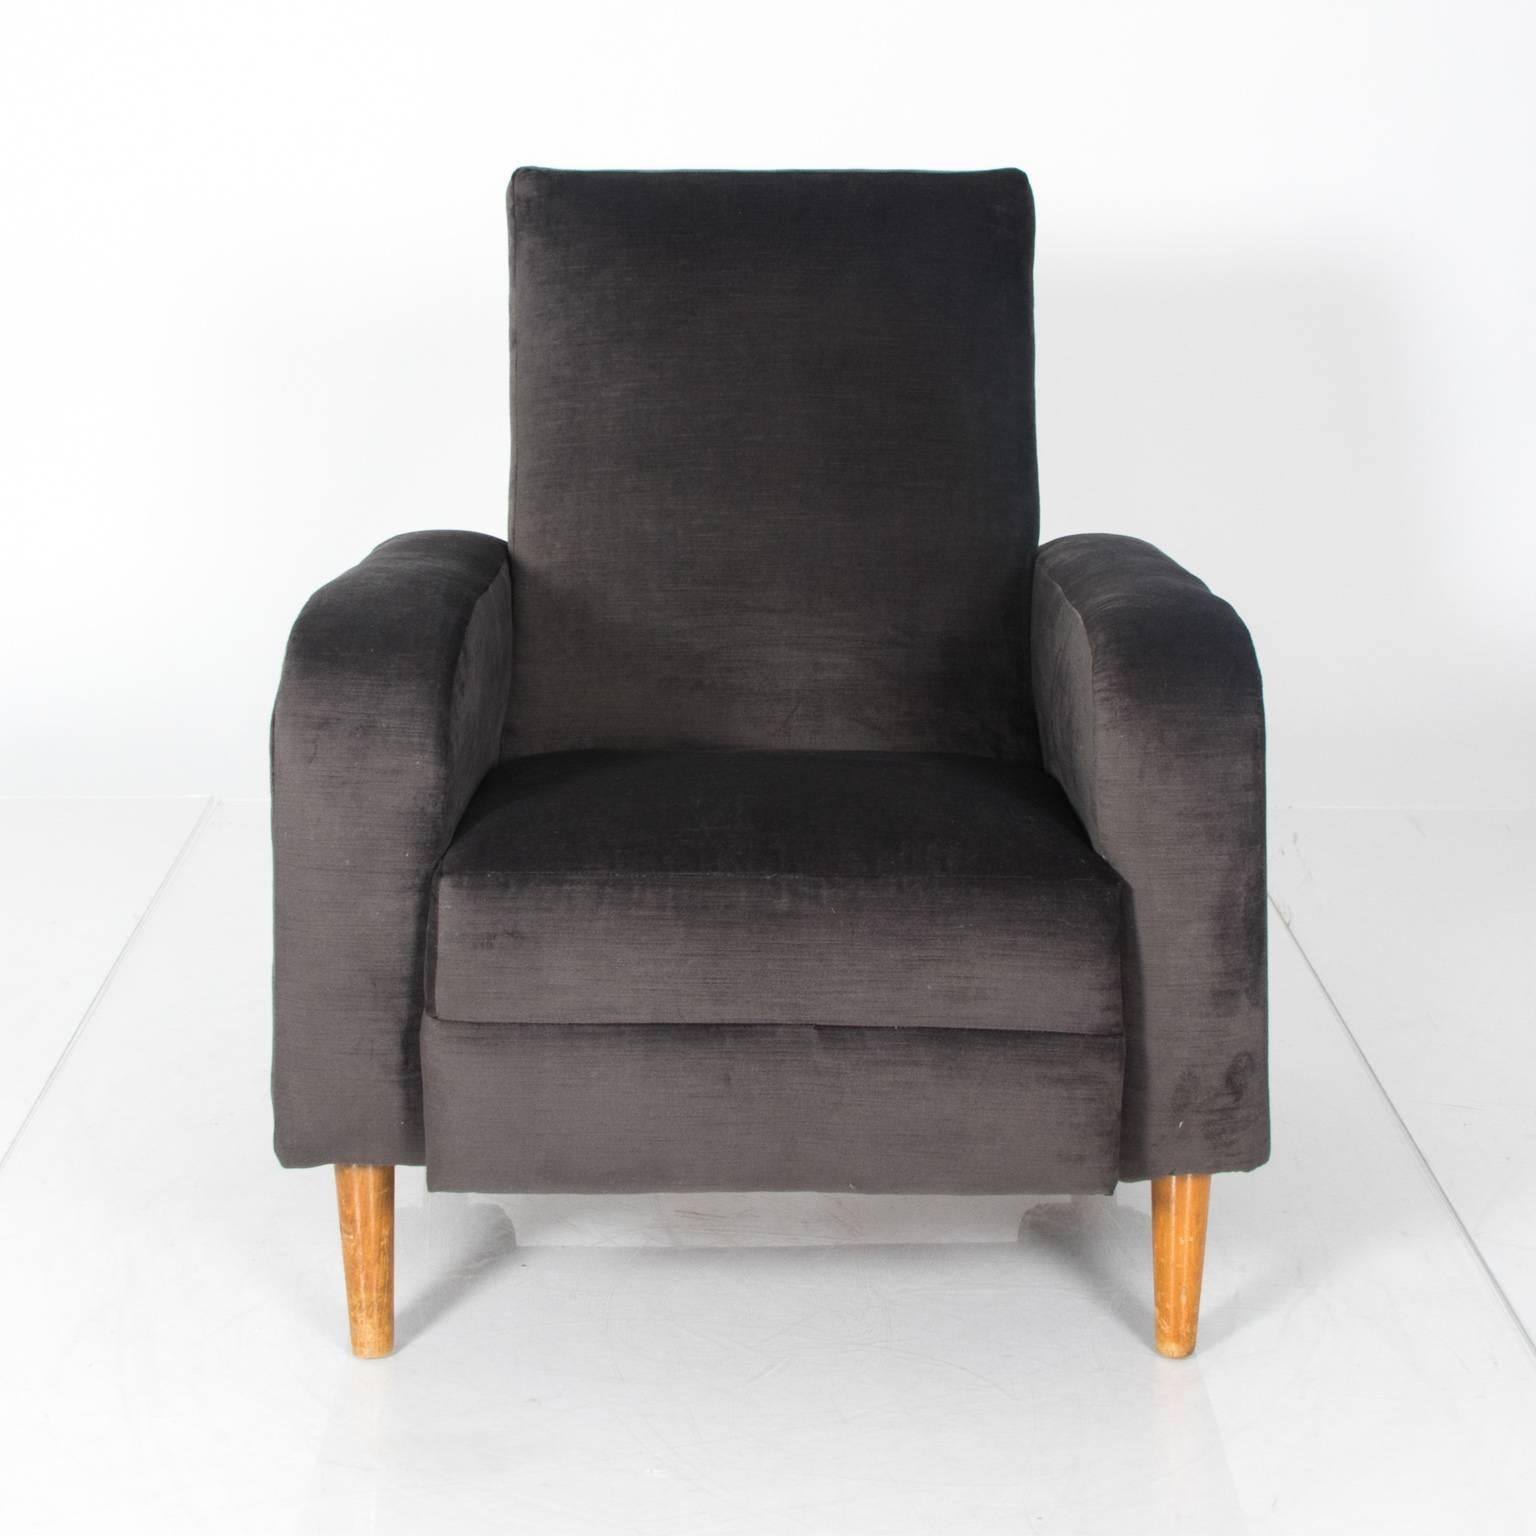 Pair of vintage modern French armchairs in charcoal grey velvet.
 